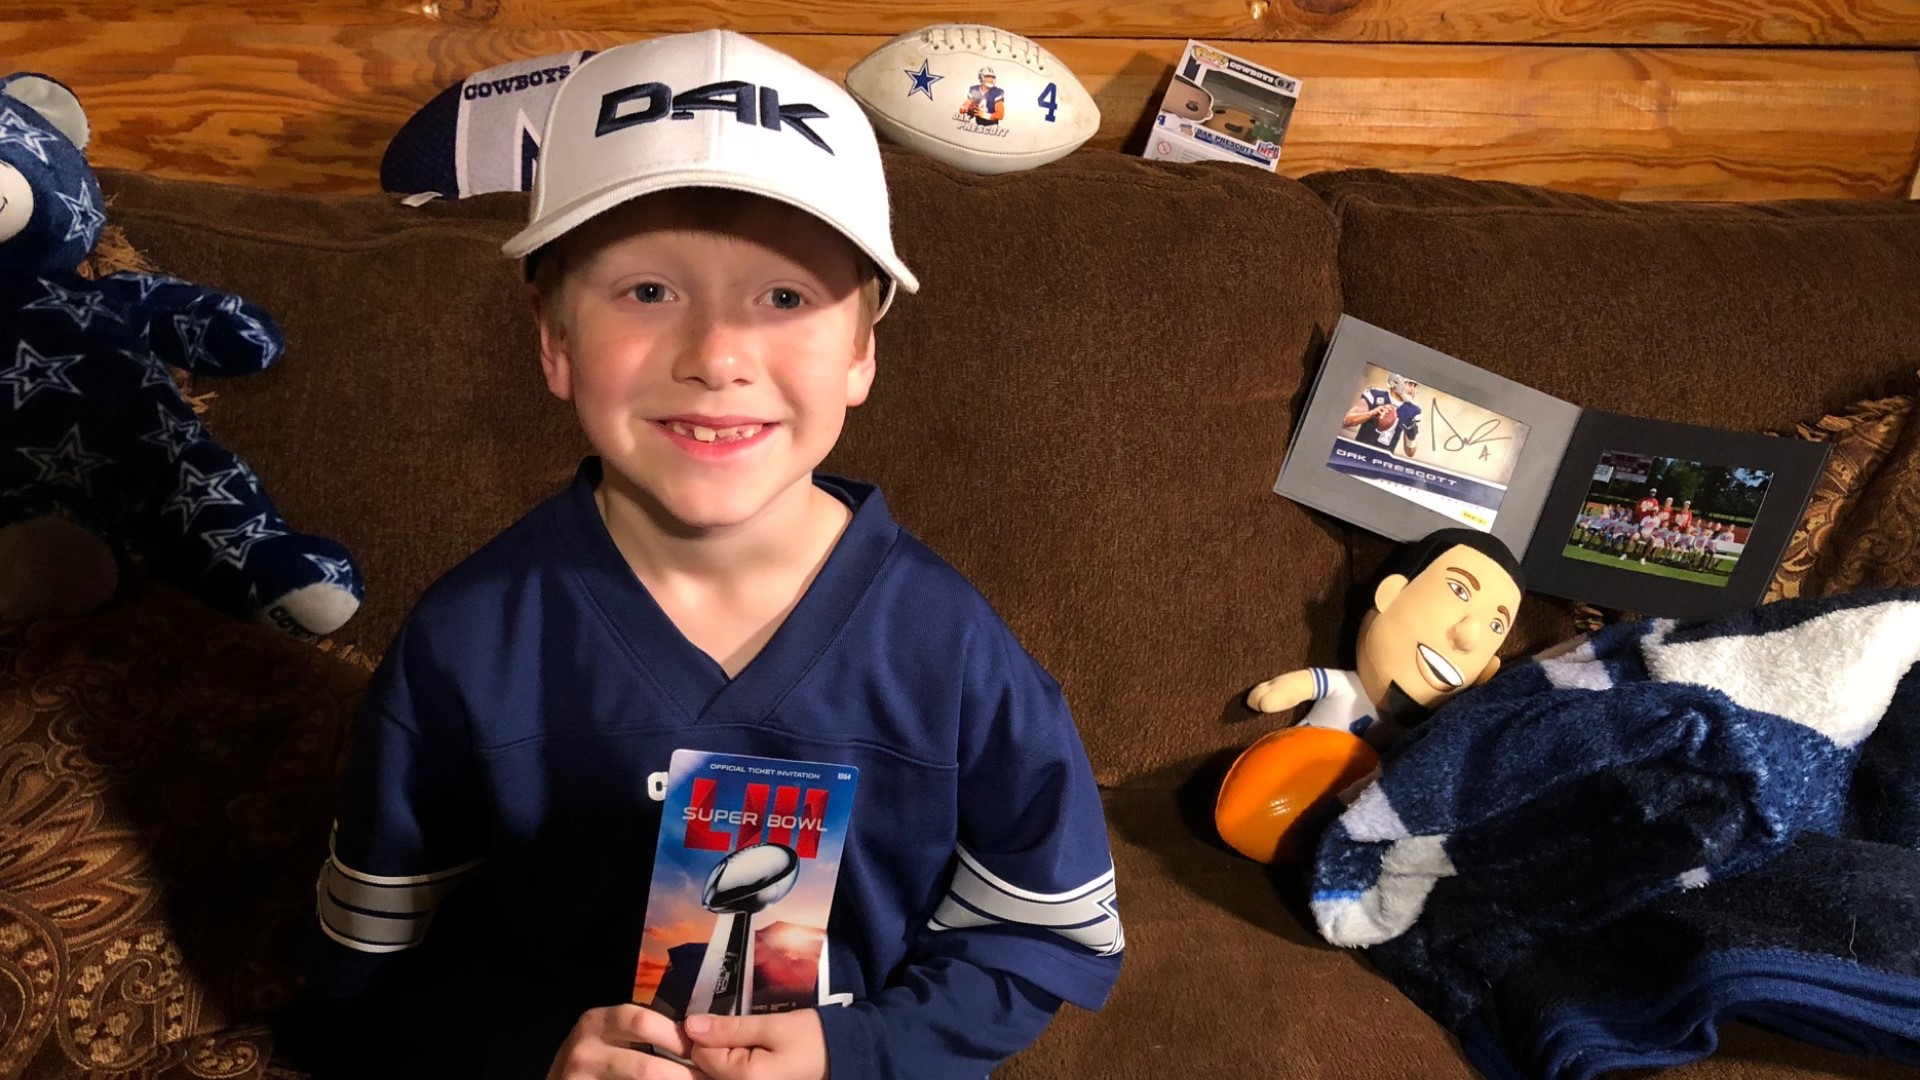 Carthage kid receives gift from Cowboys quarterback